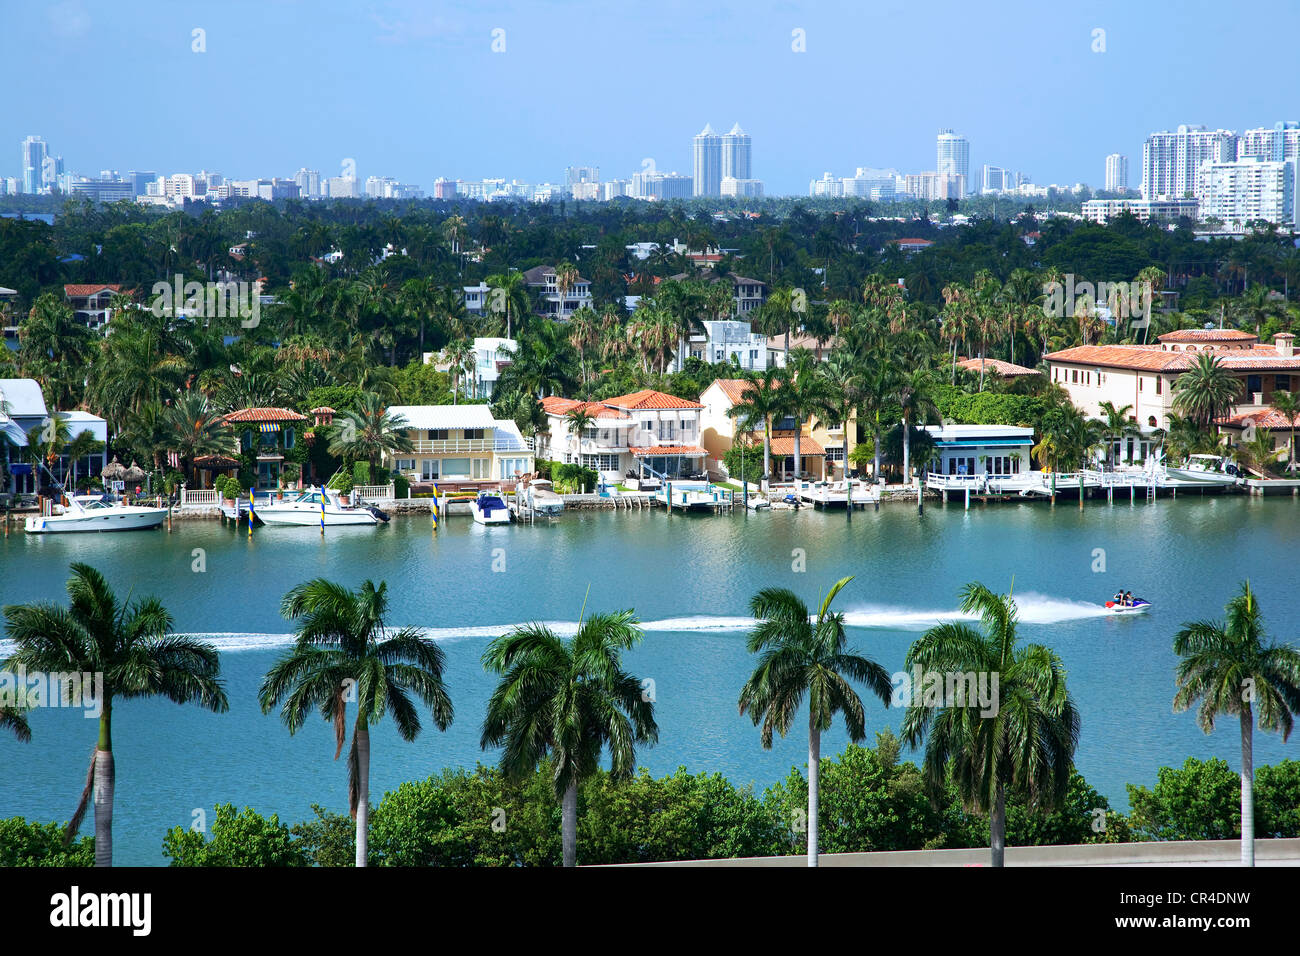 United States, Florida, Miami, Biscayne Bay, Macarthur Causeway and Palm Island, in the background Miami beach Stock Photo